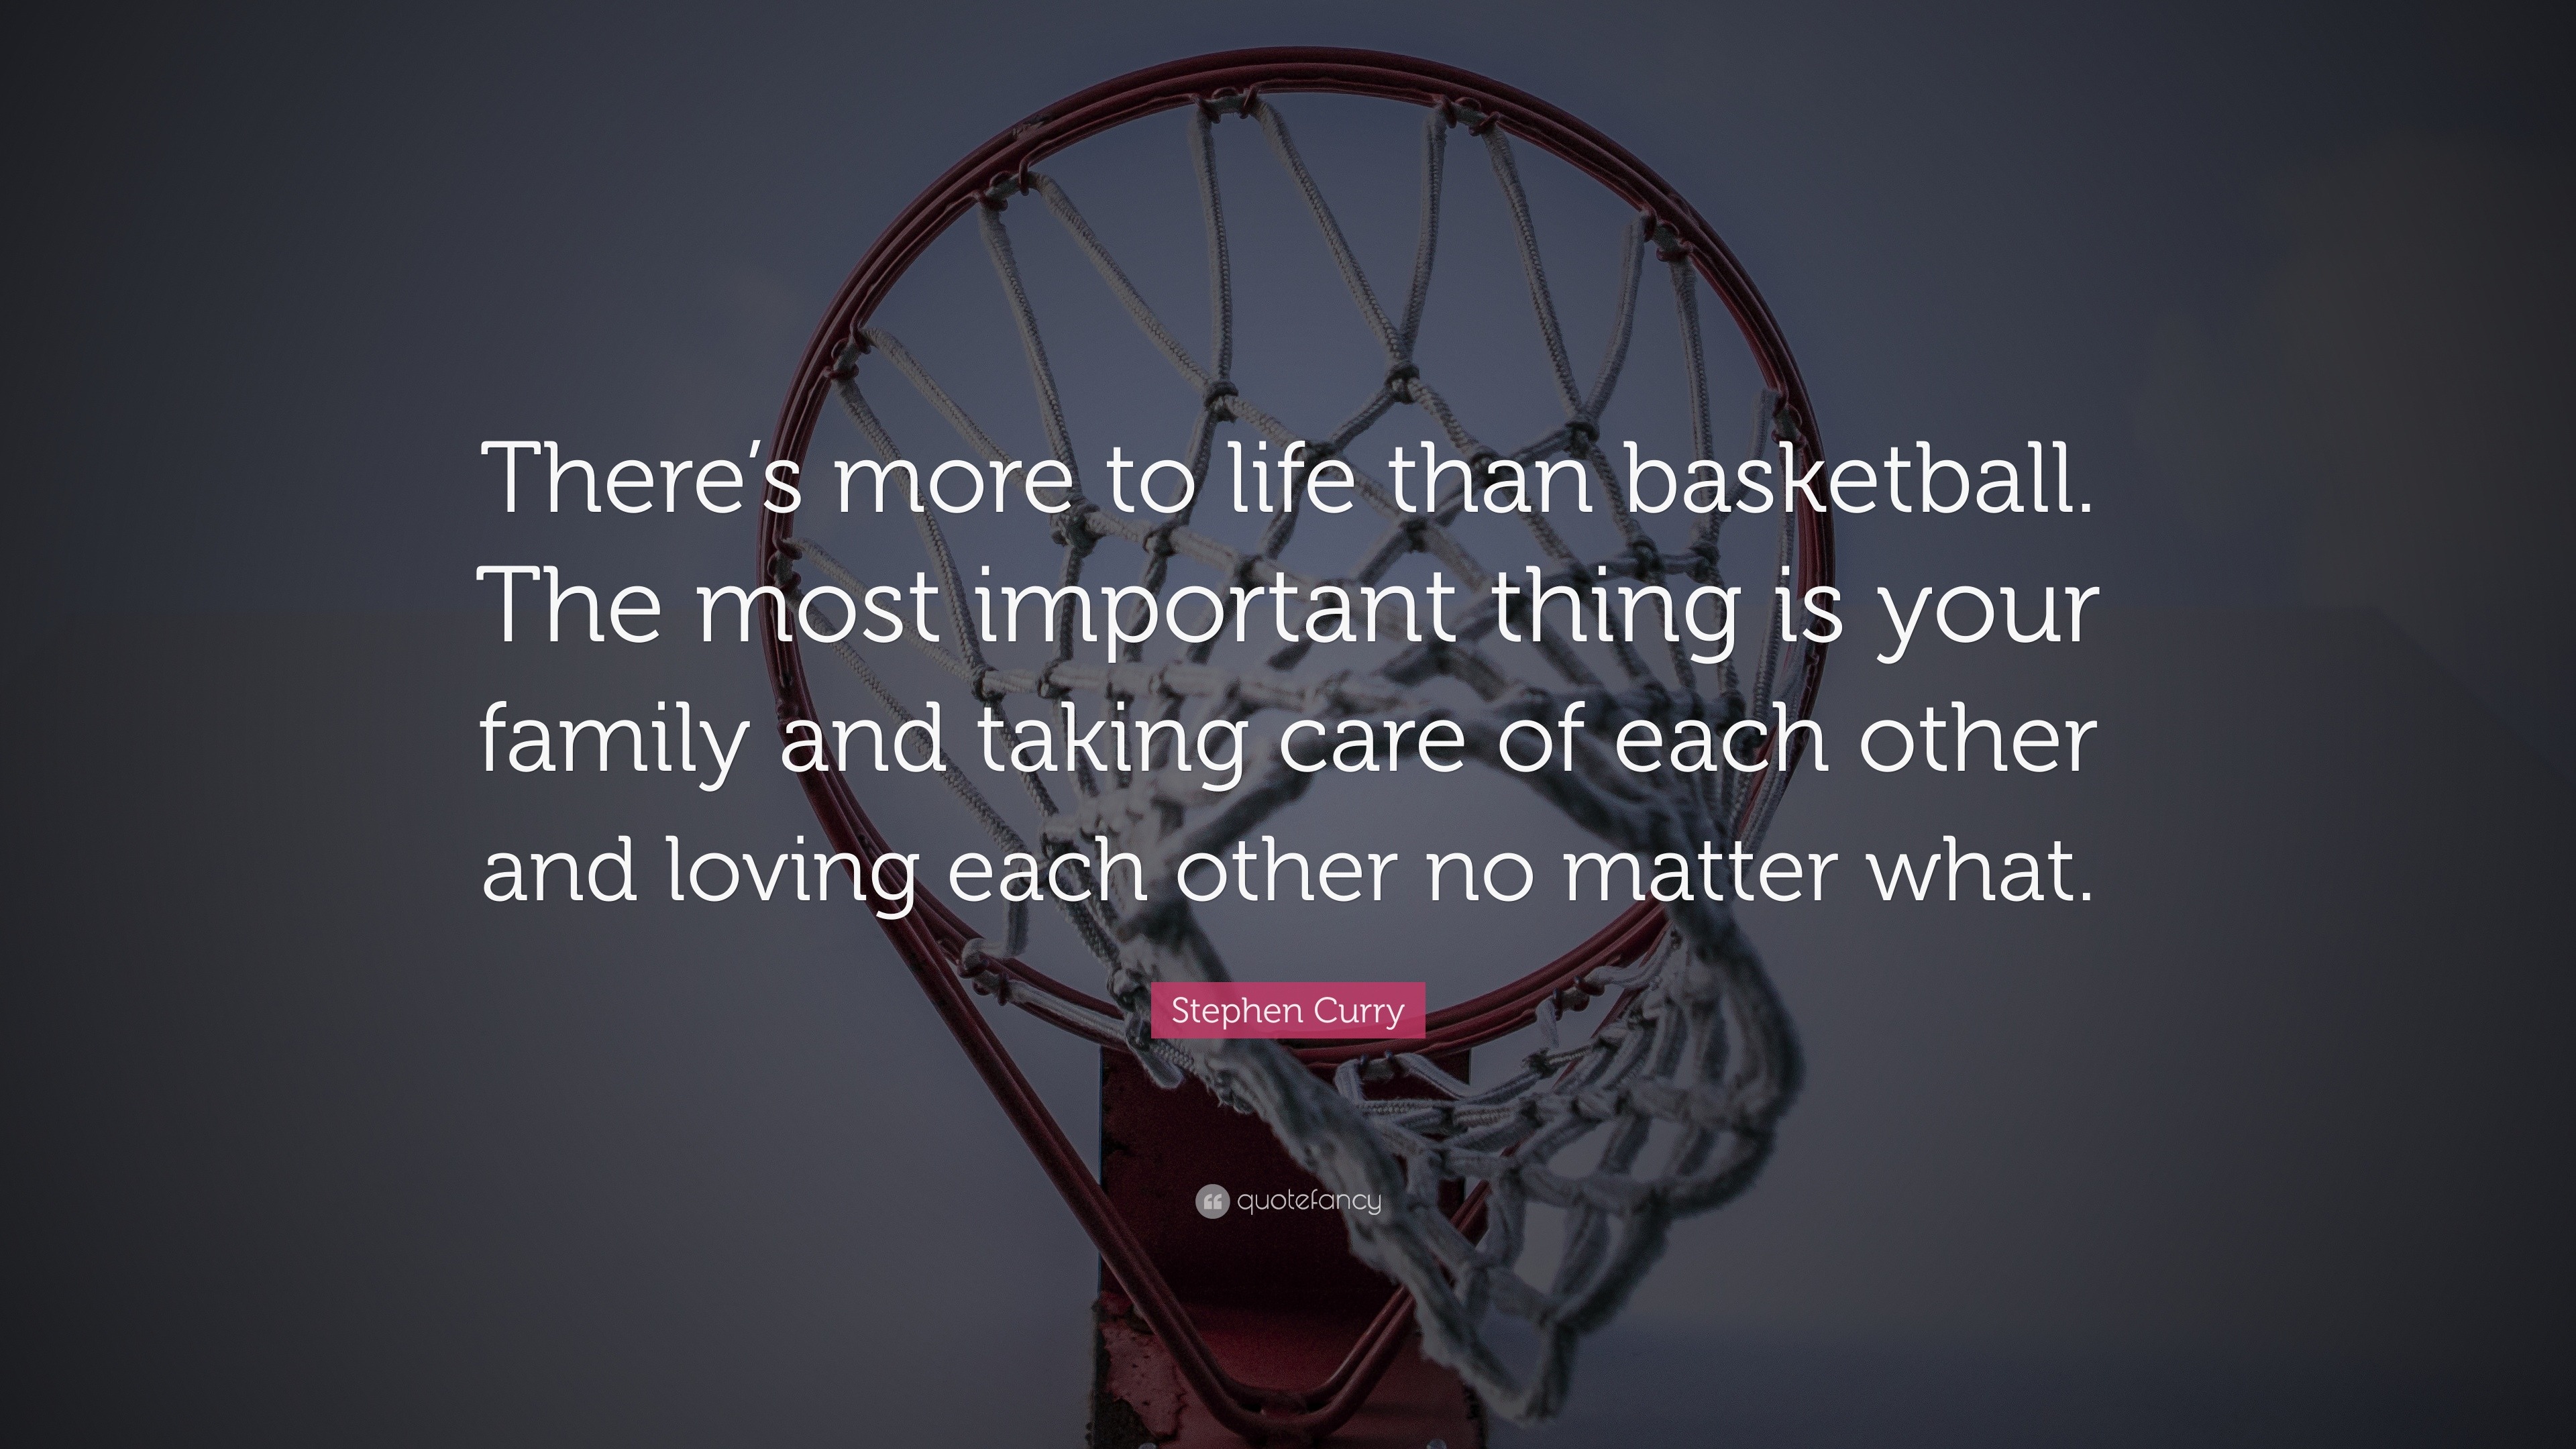 Stephen Curry Quote “There s more to life than basketball The most important thing